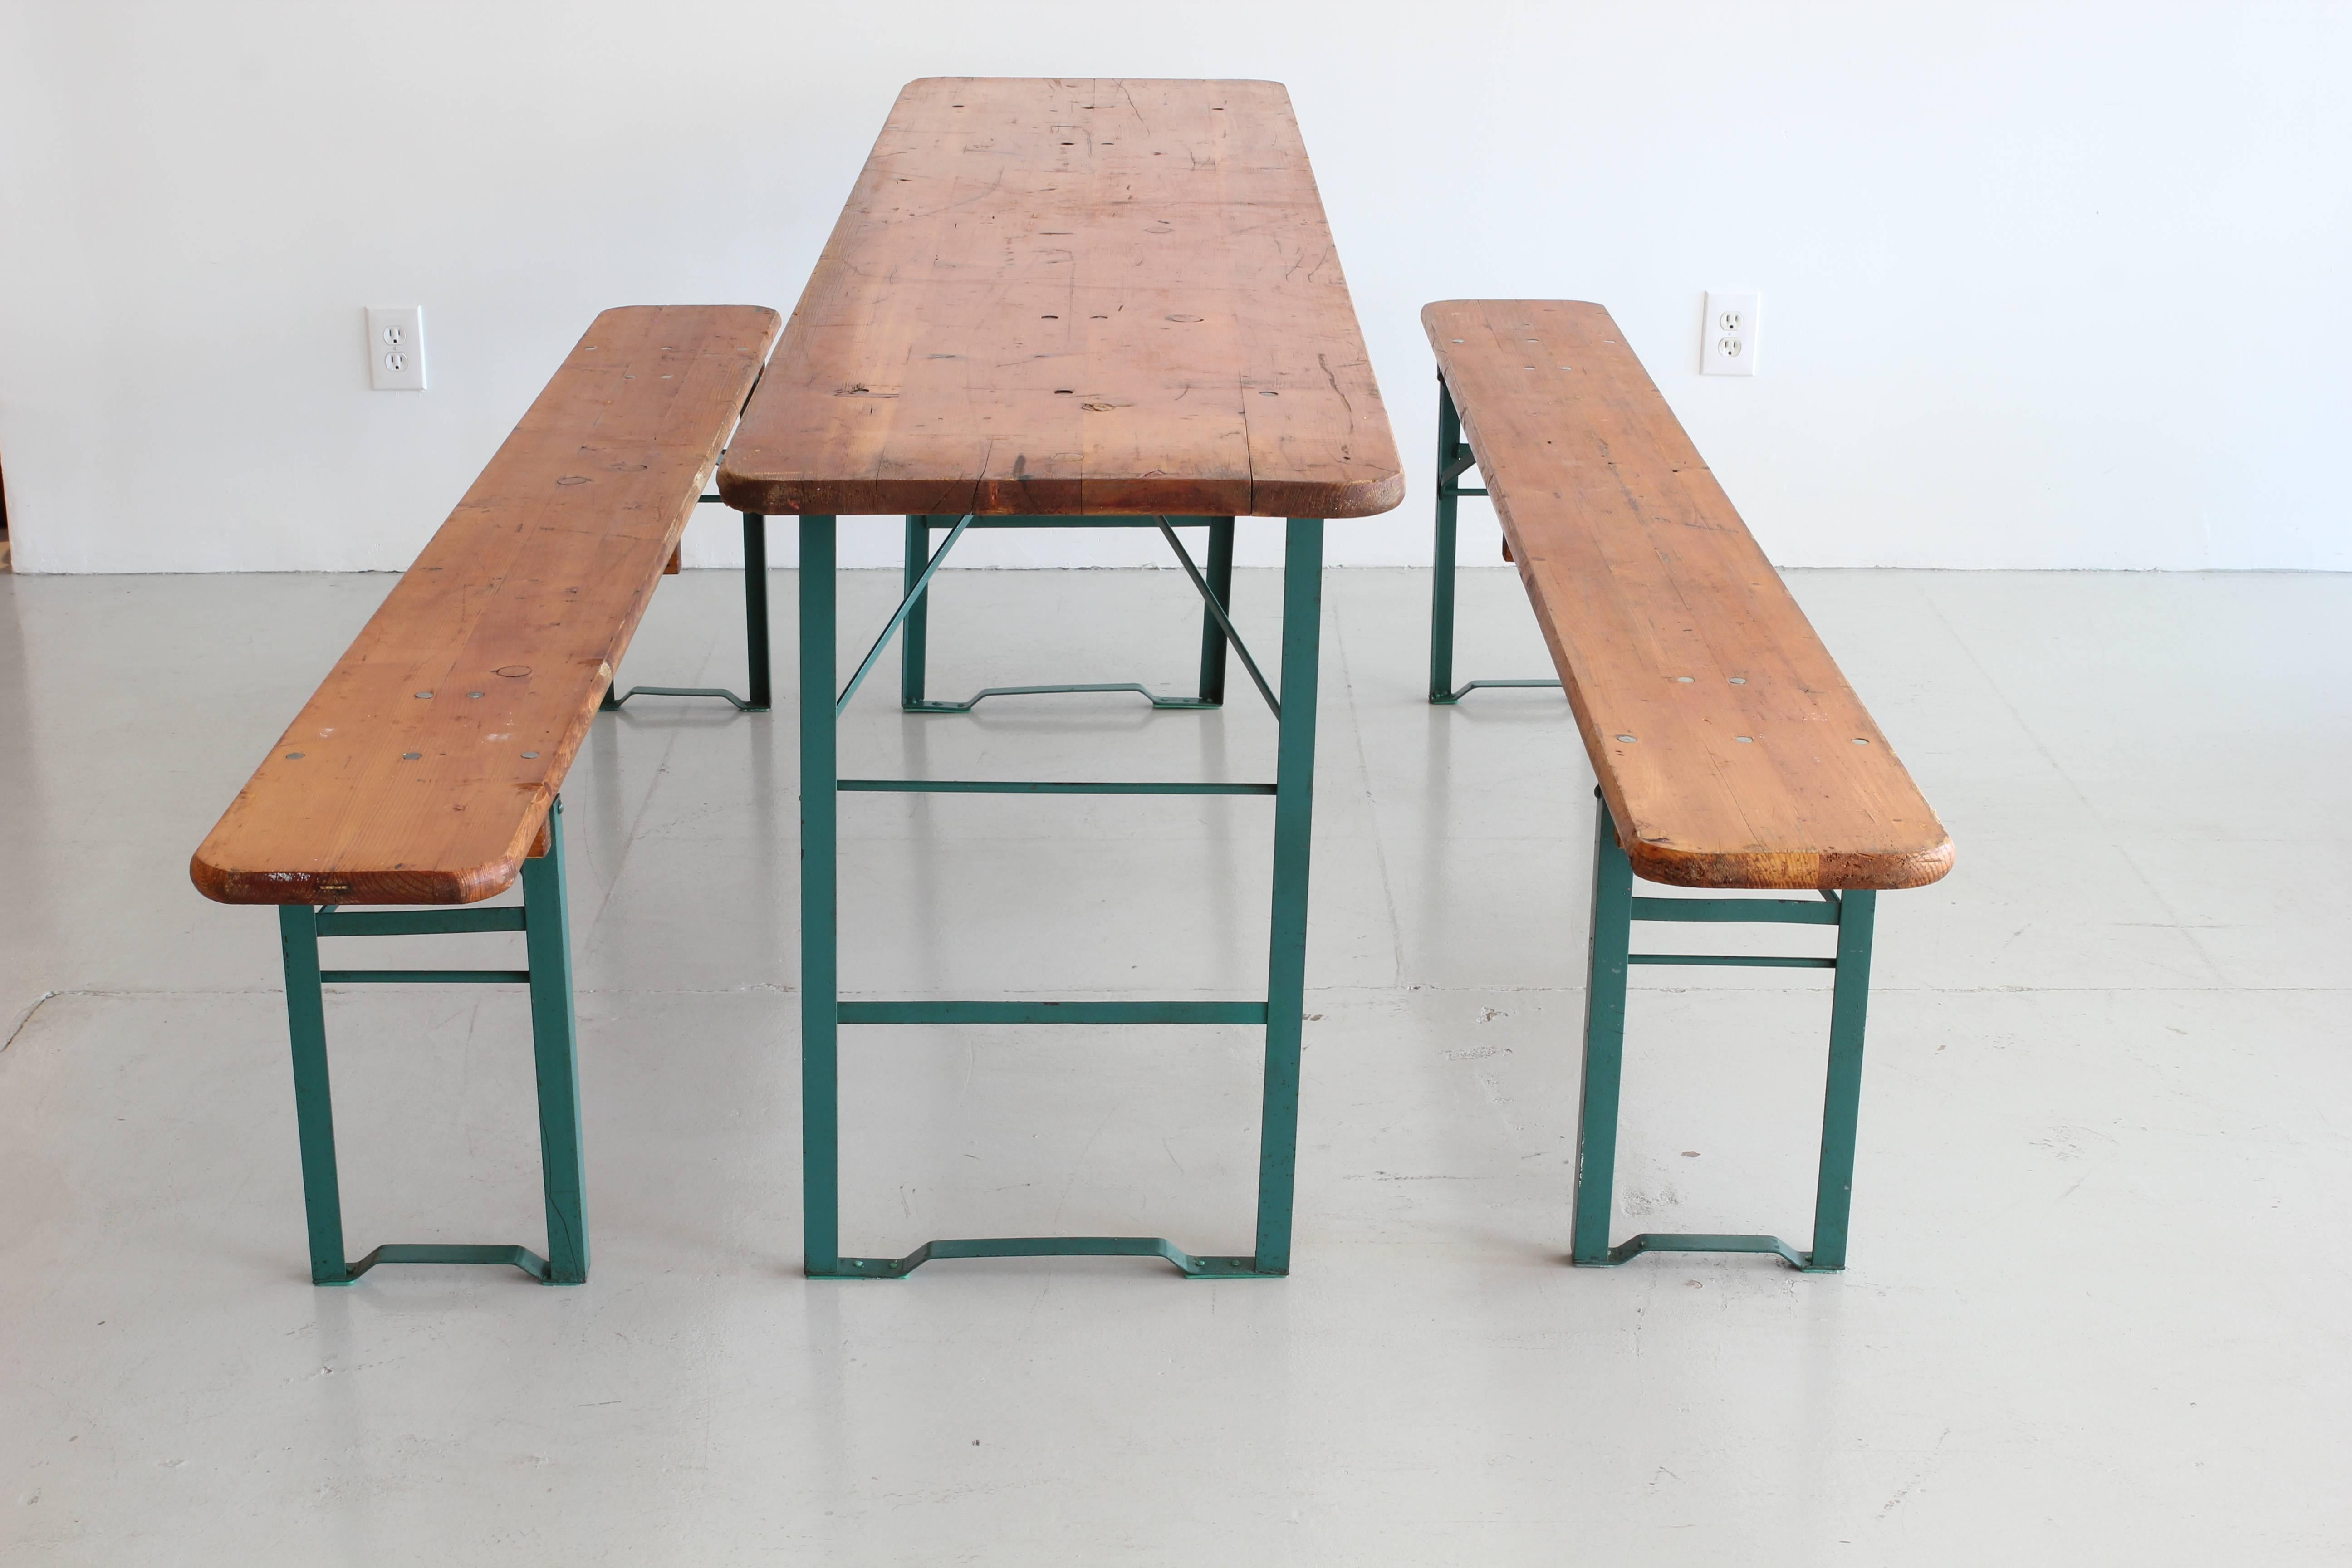 German Beer Garden picnic table with green metal legs and wood top.
Great patina and heavy construction.
Includes table and two benches.
 